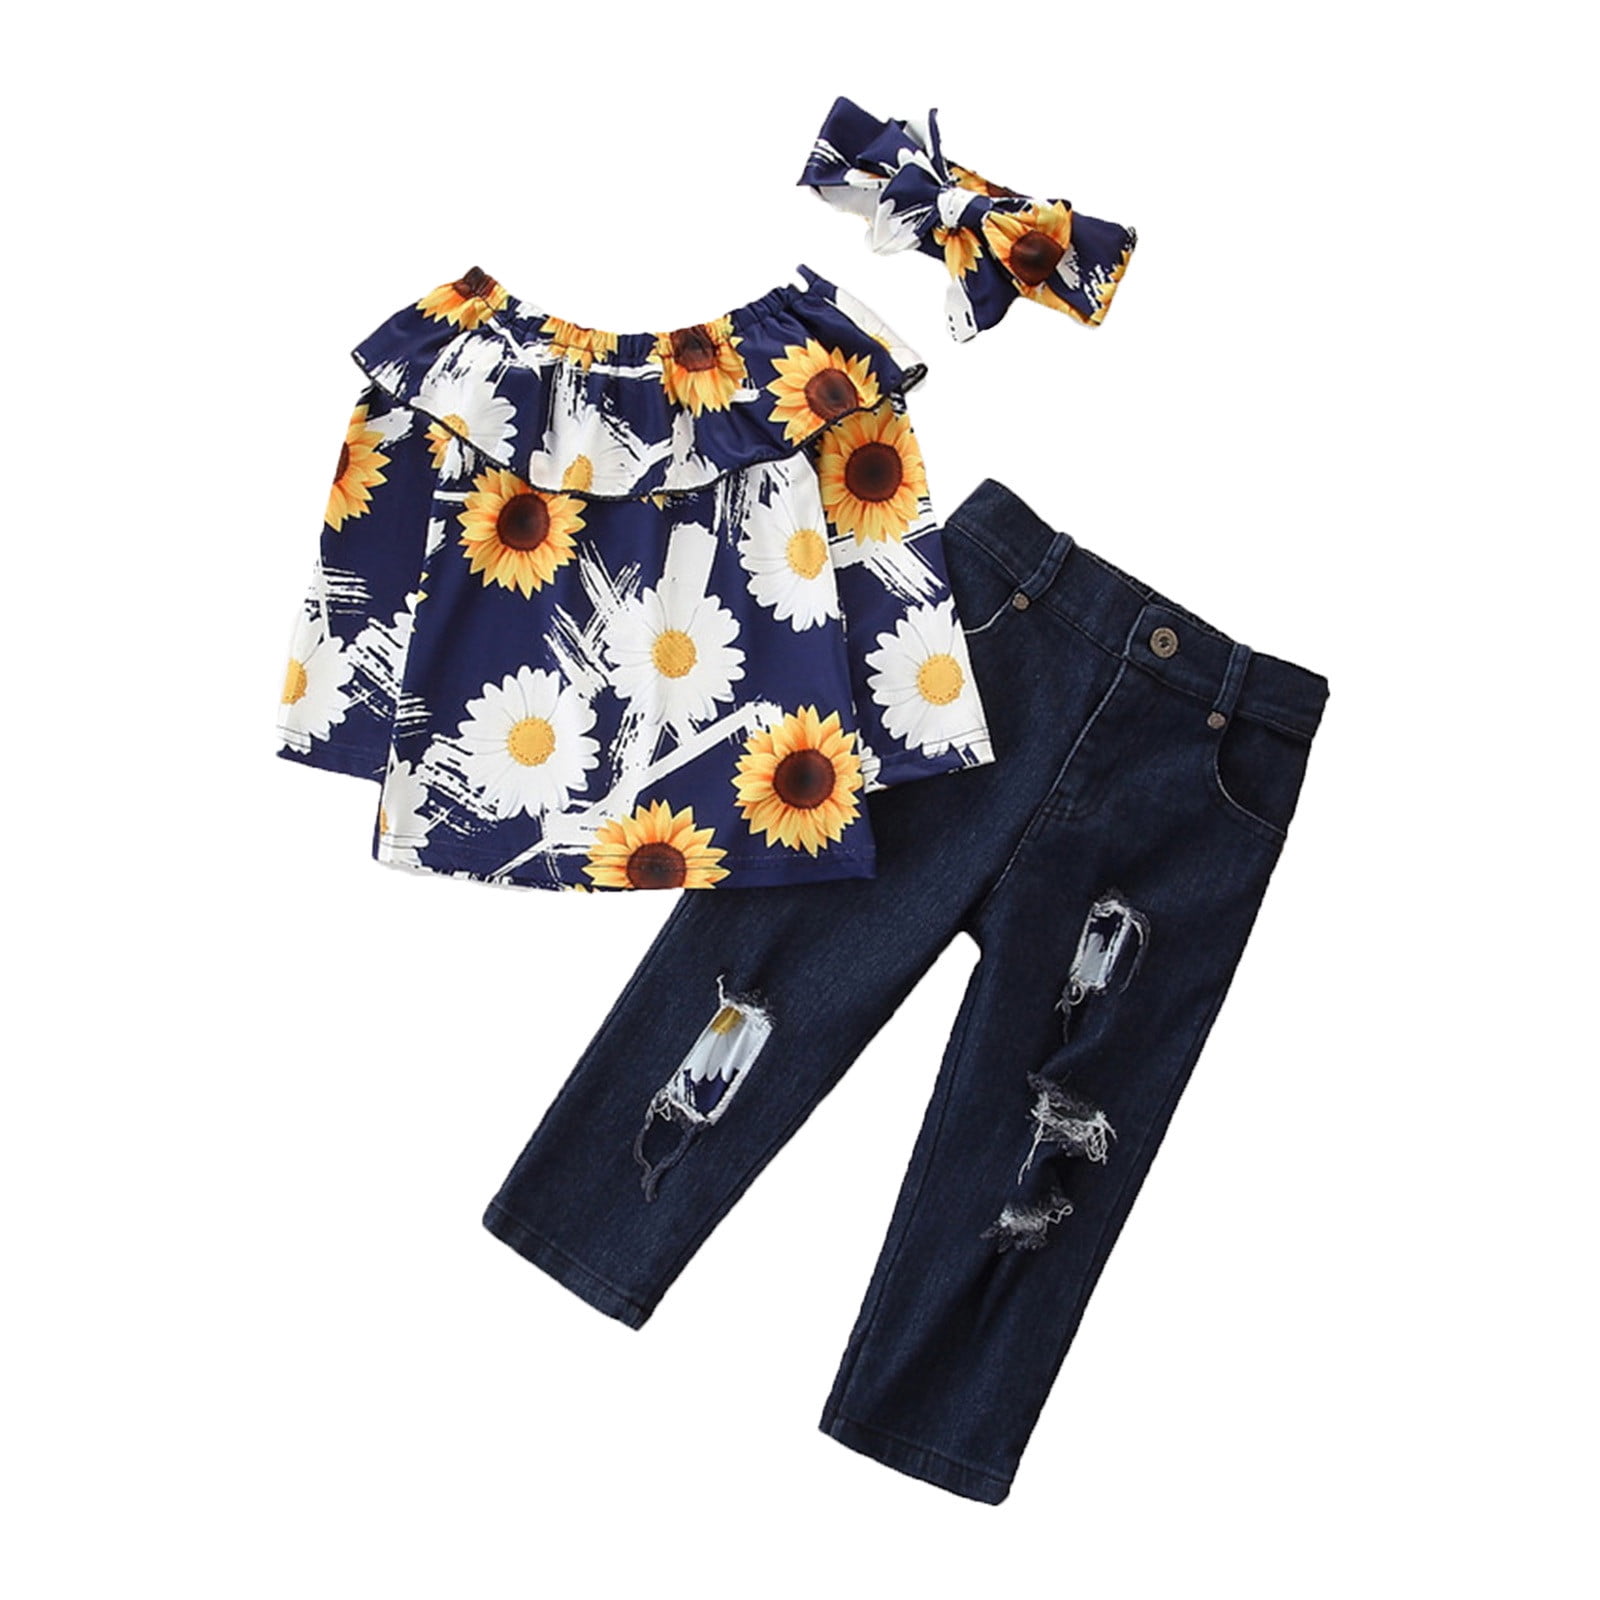 Little Girls Clothes Size 7-8 Toddler Girls Outfit Sunflowers Prints ...